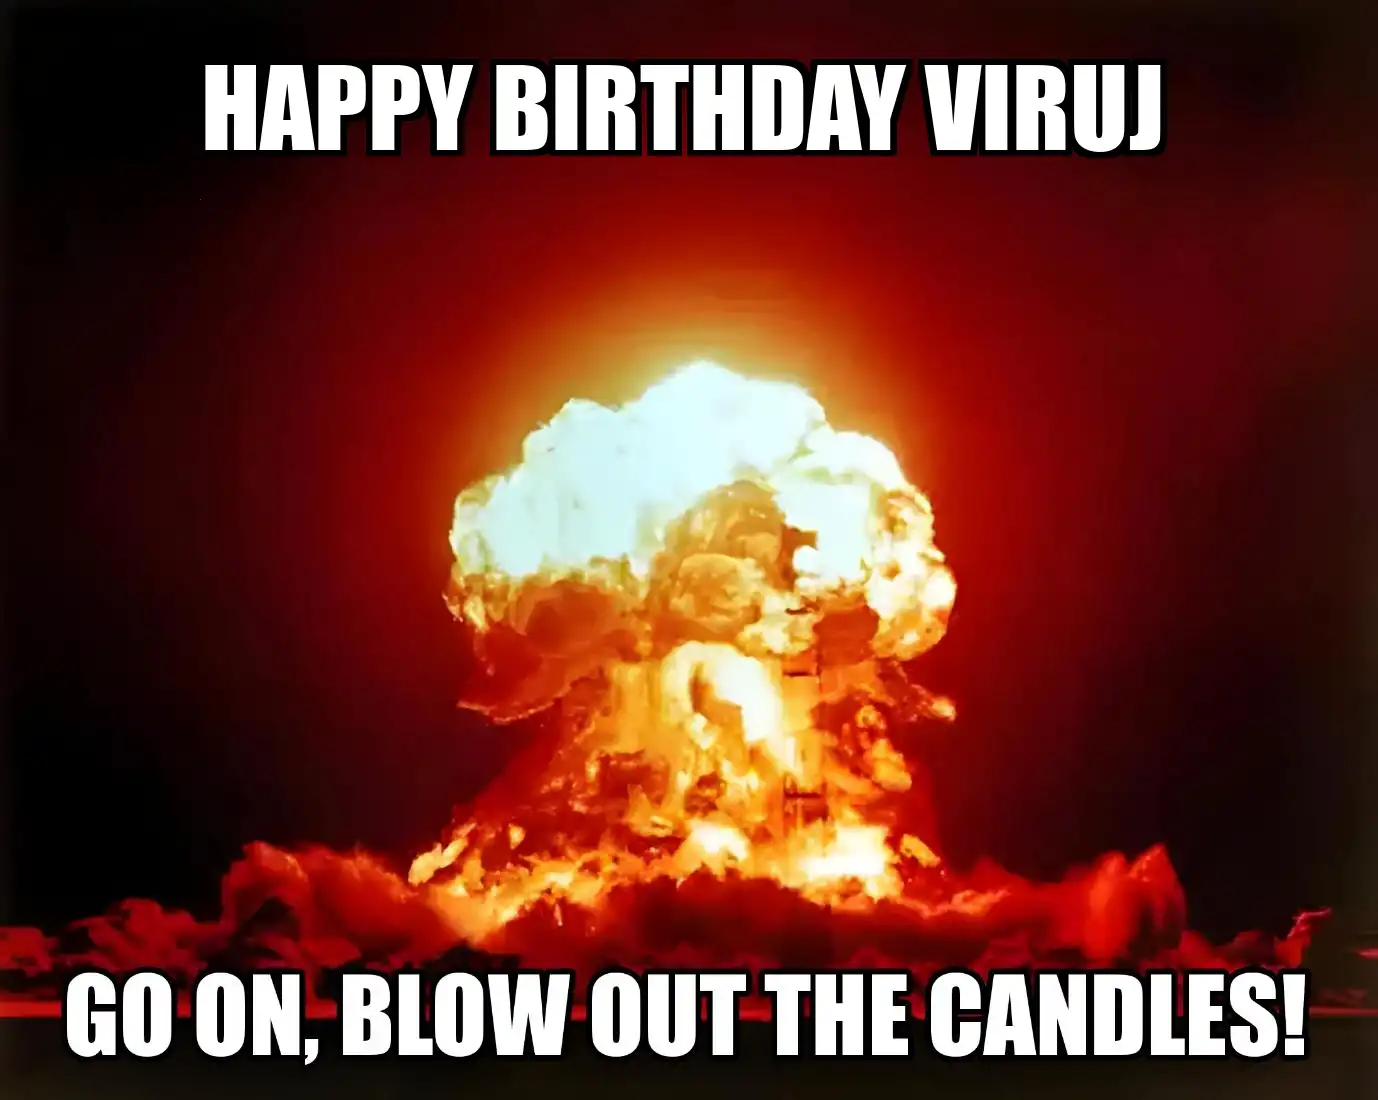 Happy Birthday Viruj Go On Blow Out The Candles Meme